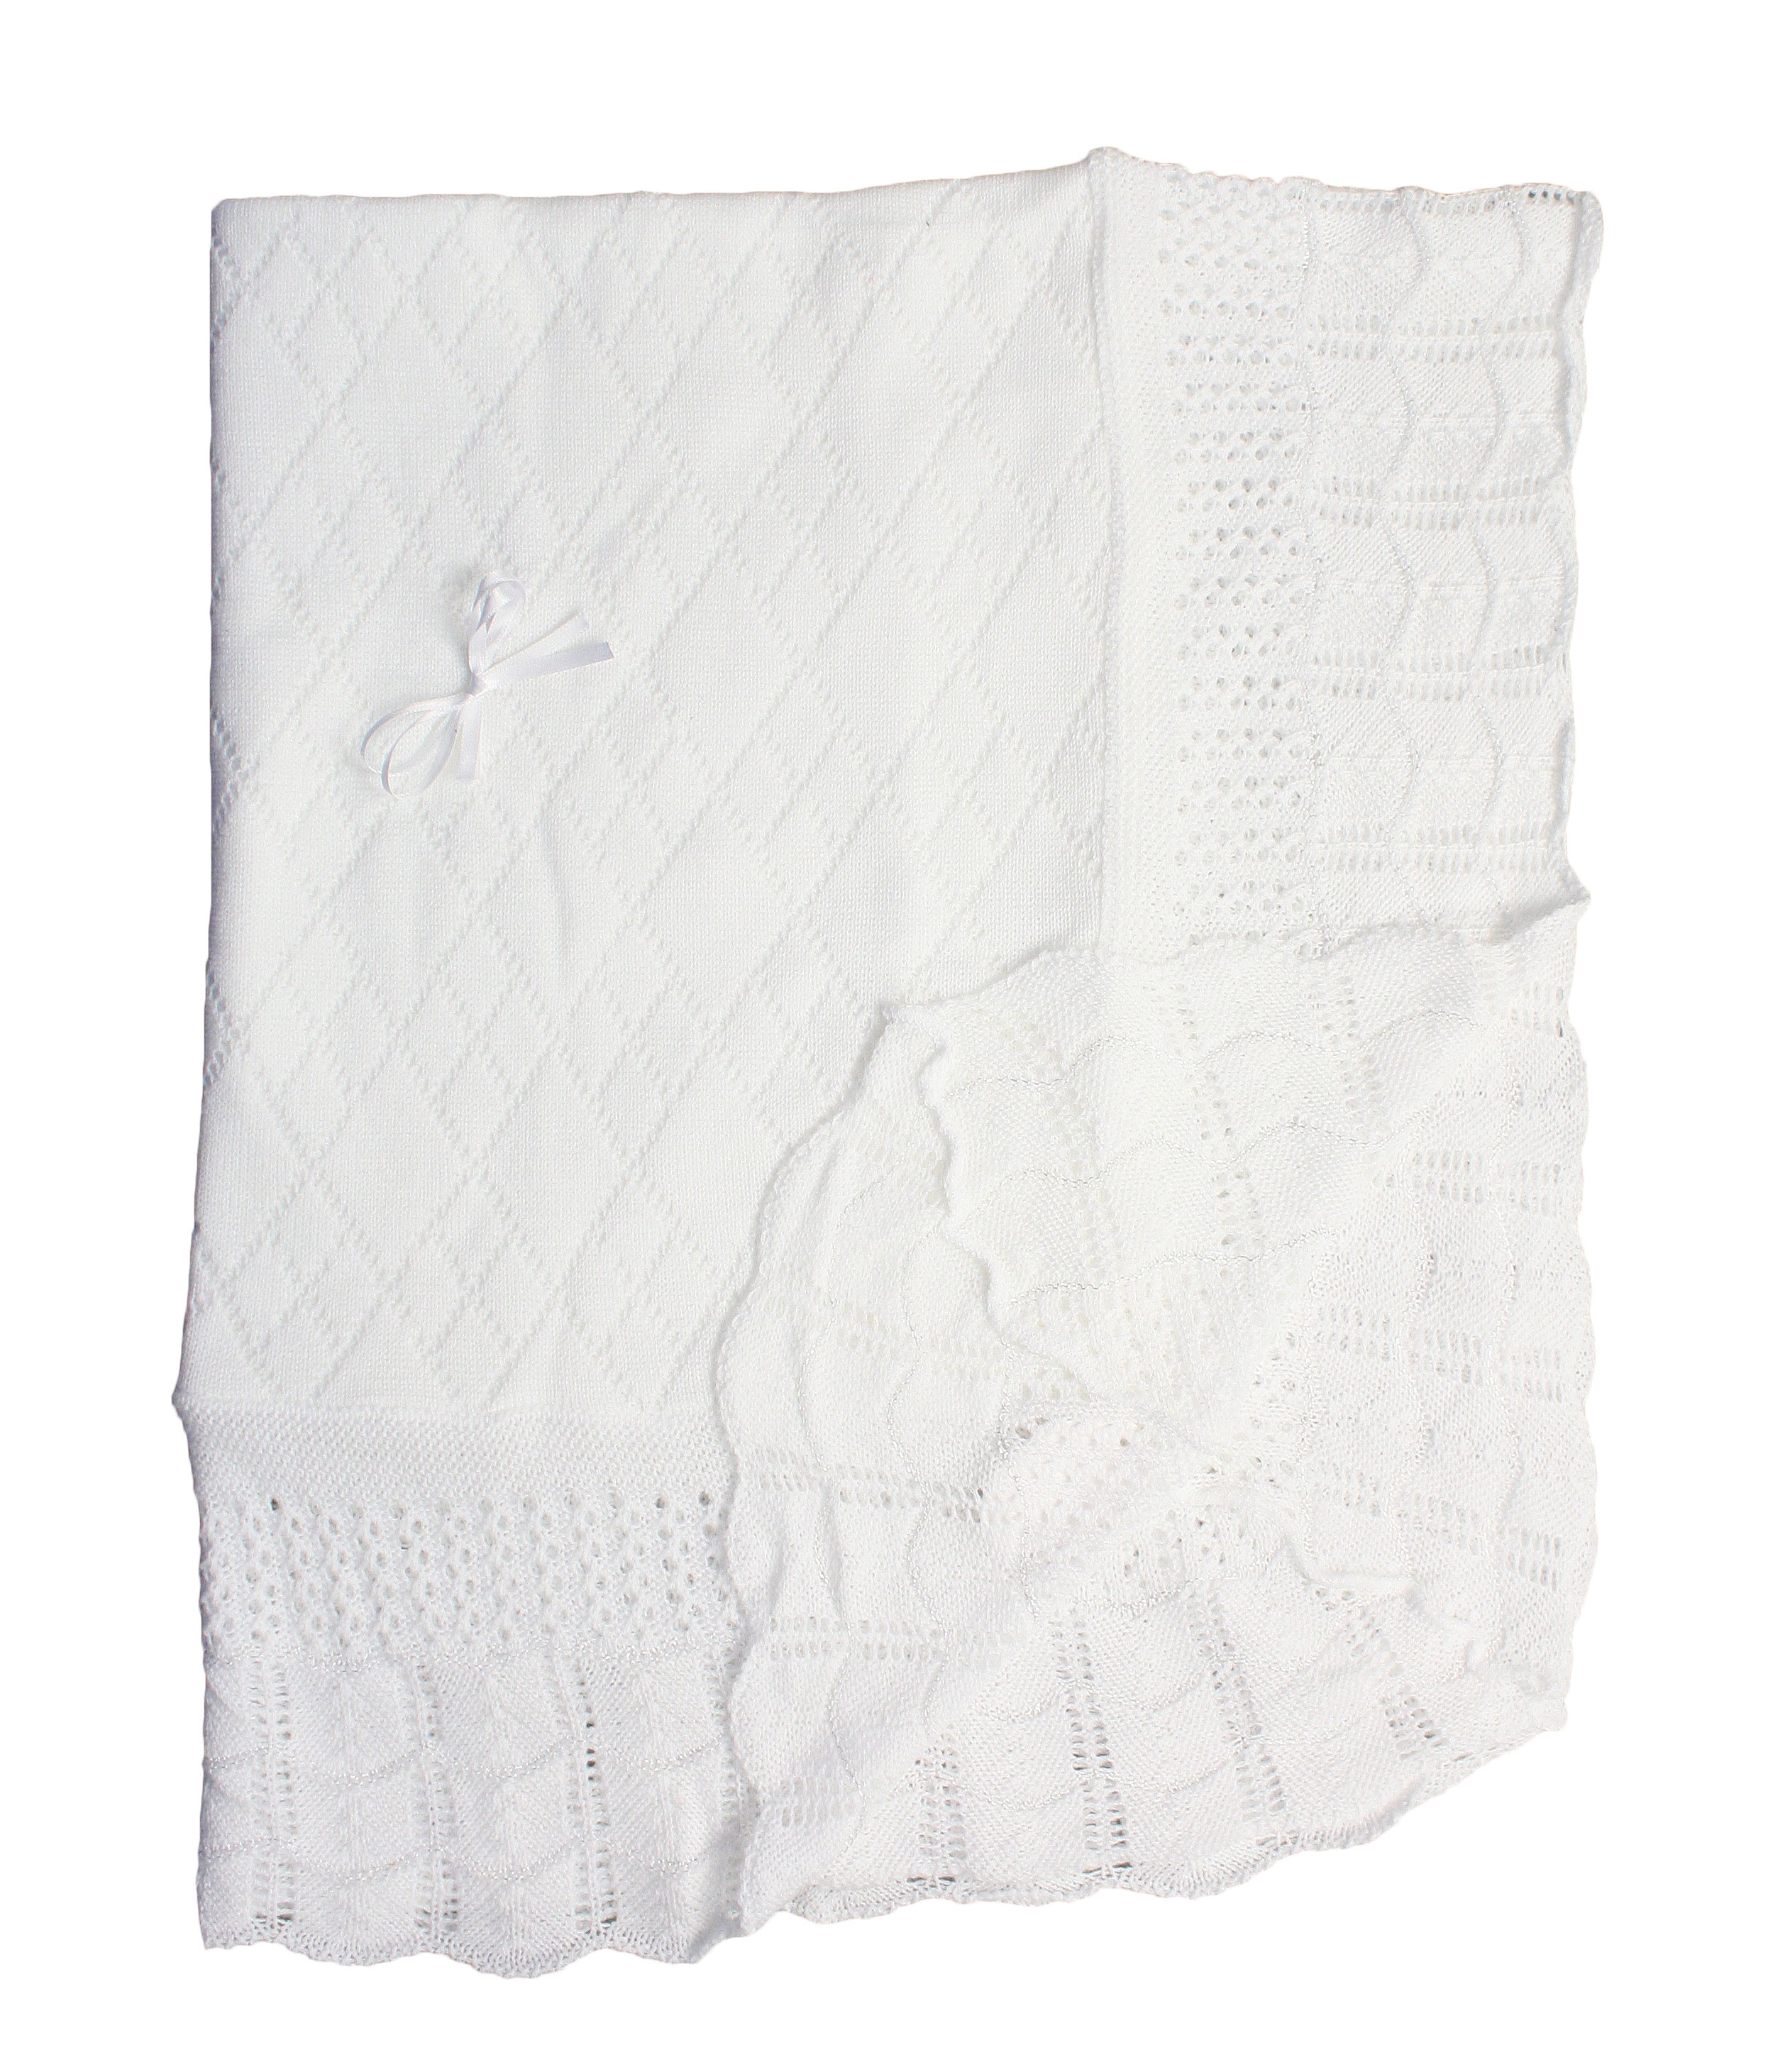 Baby Fancy Christening White Hand Crochet 100% Cotton Shawl/Blanket 49 x 39 In - Ribbon Bow - Little Things Mean a Lot